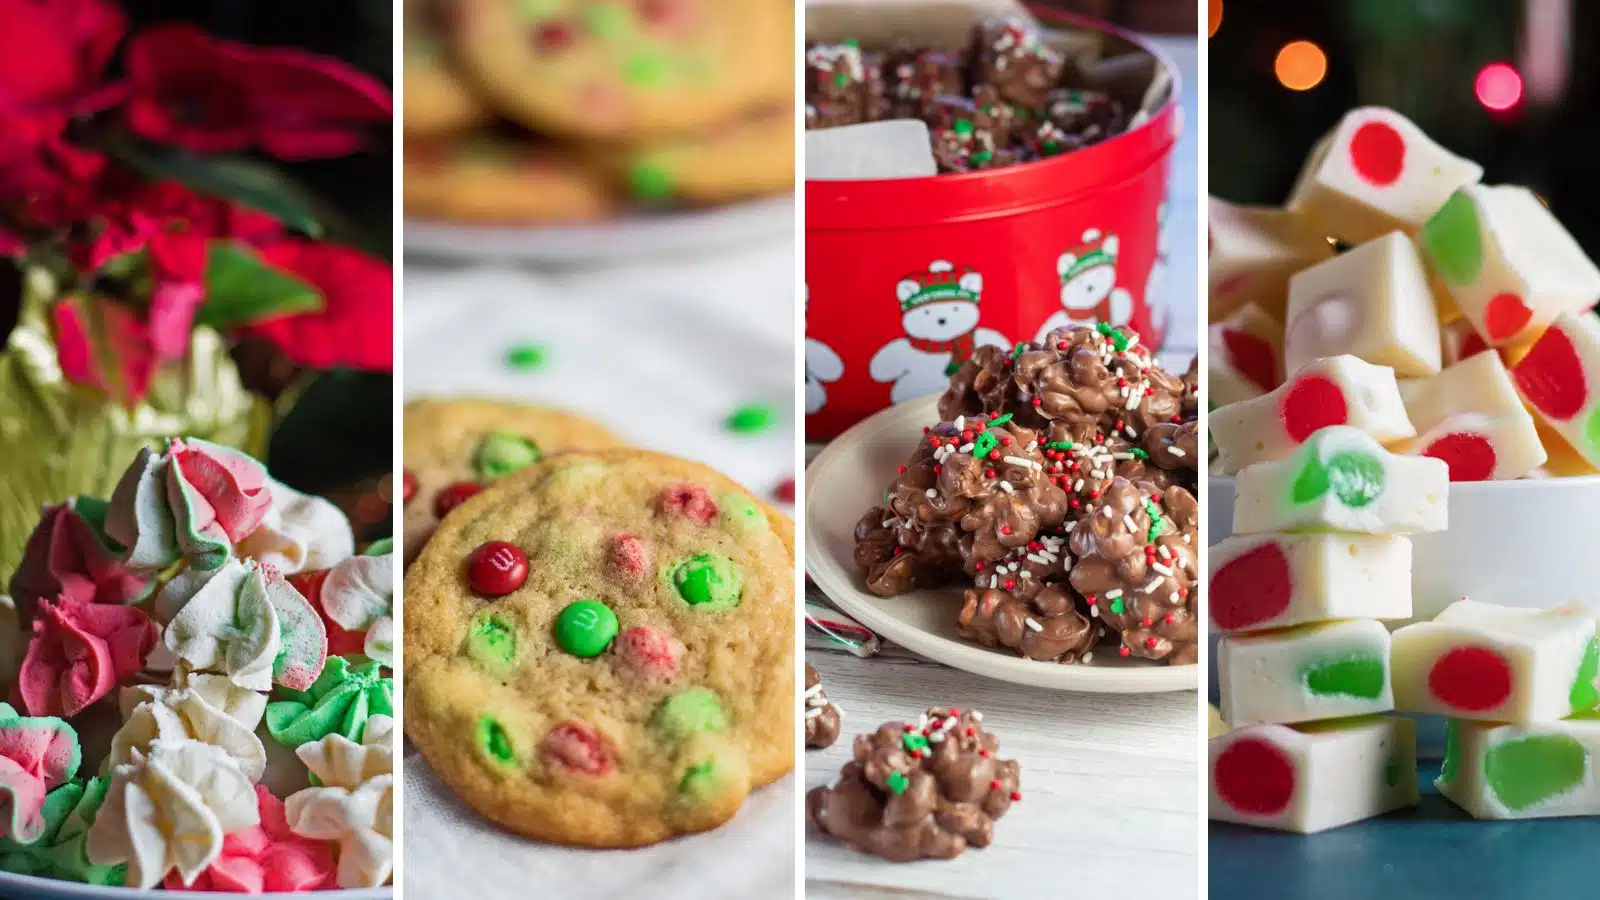 4 Easy Christmas desserts in a side-by-side collage image.